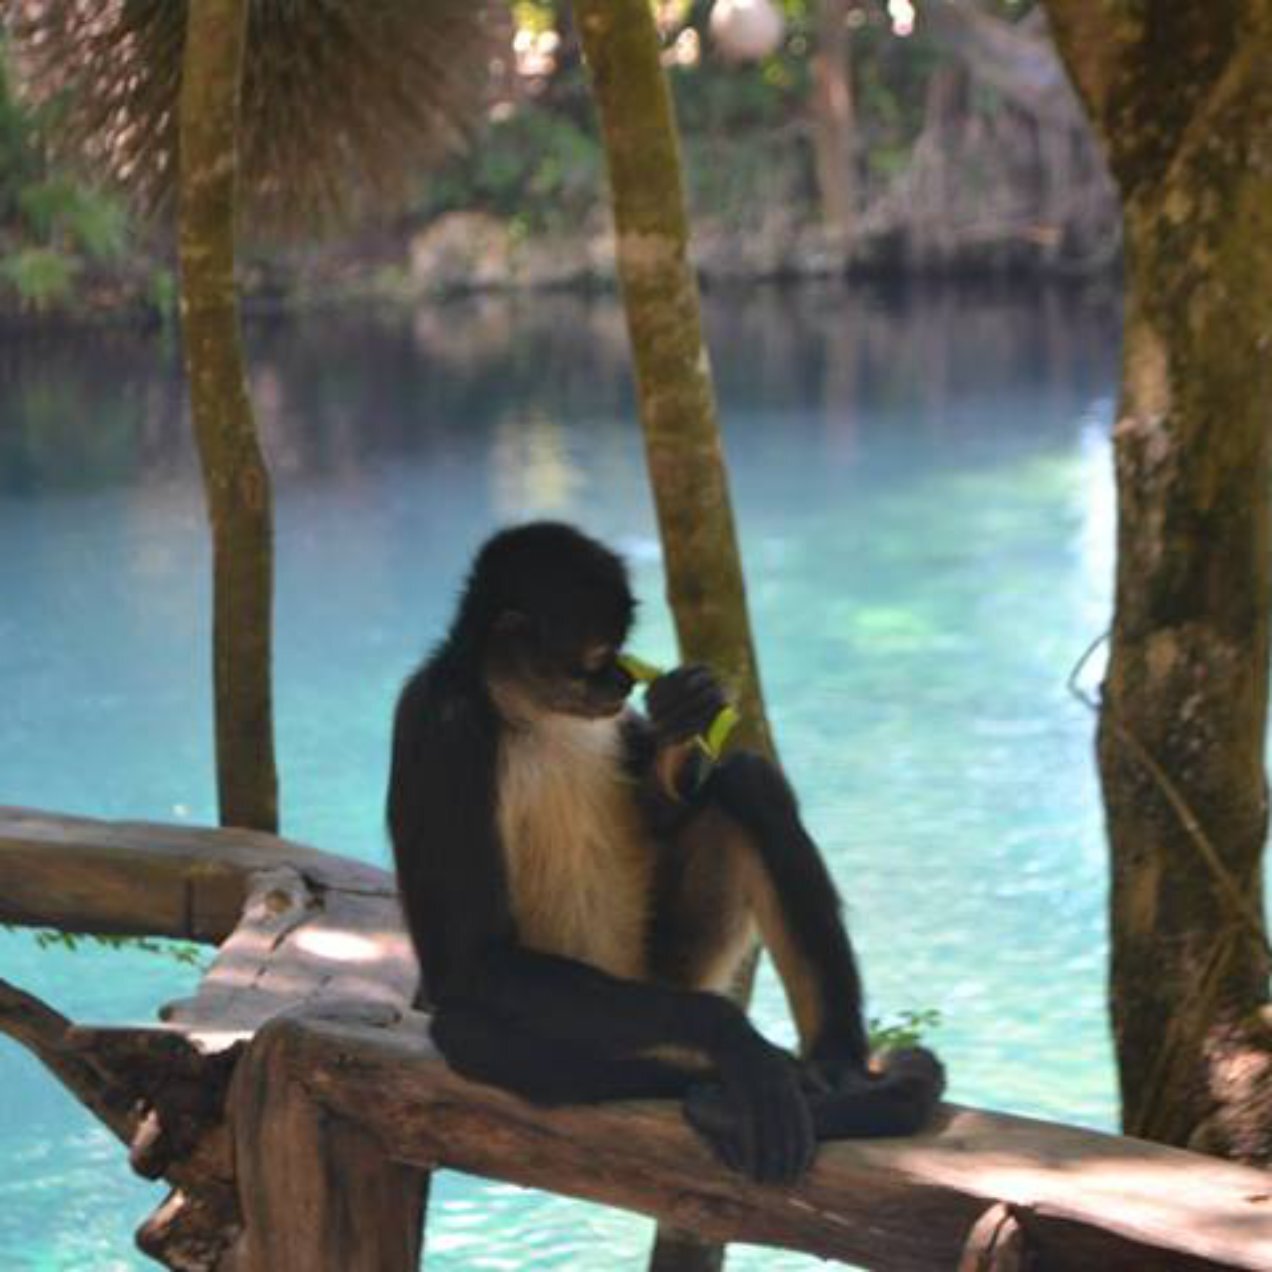 Things we Have in Common with Spider Monkeys